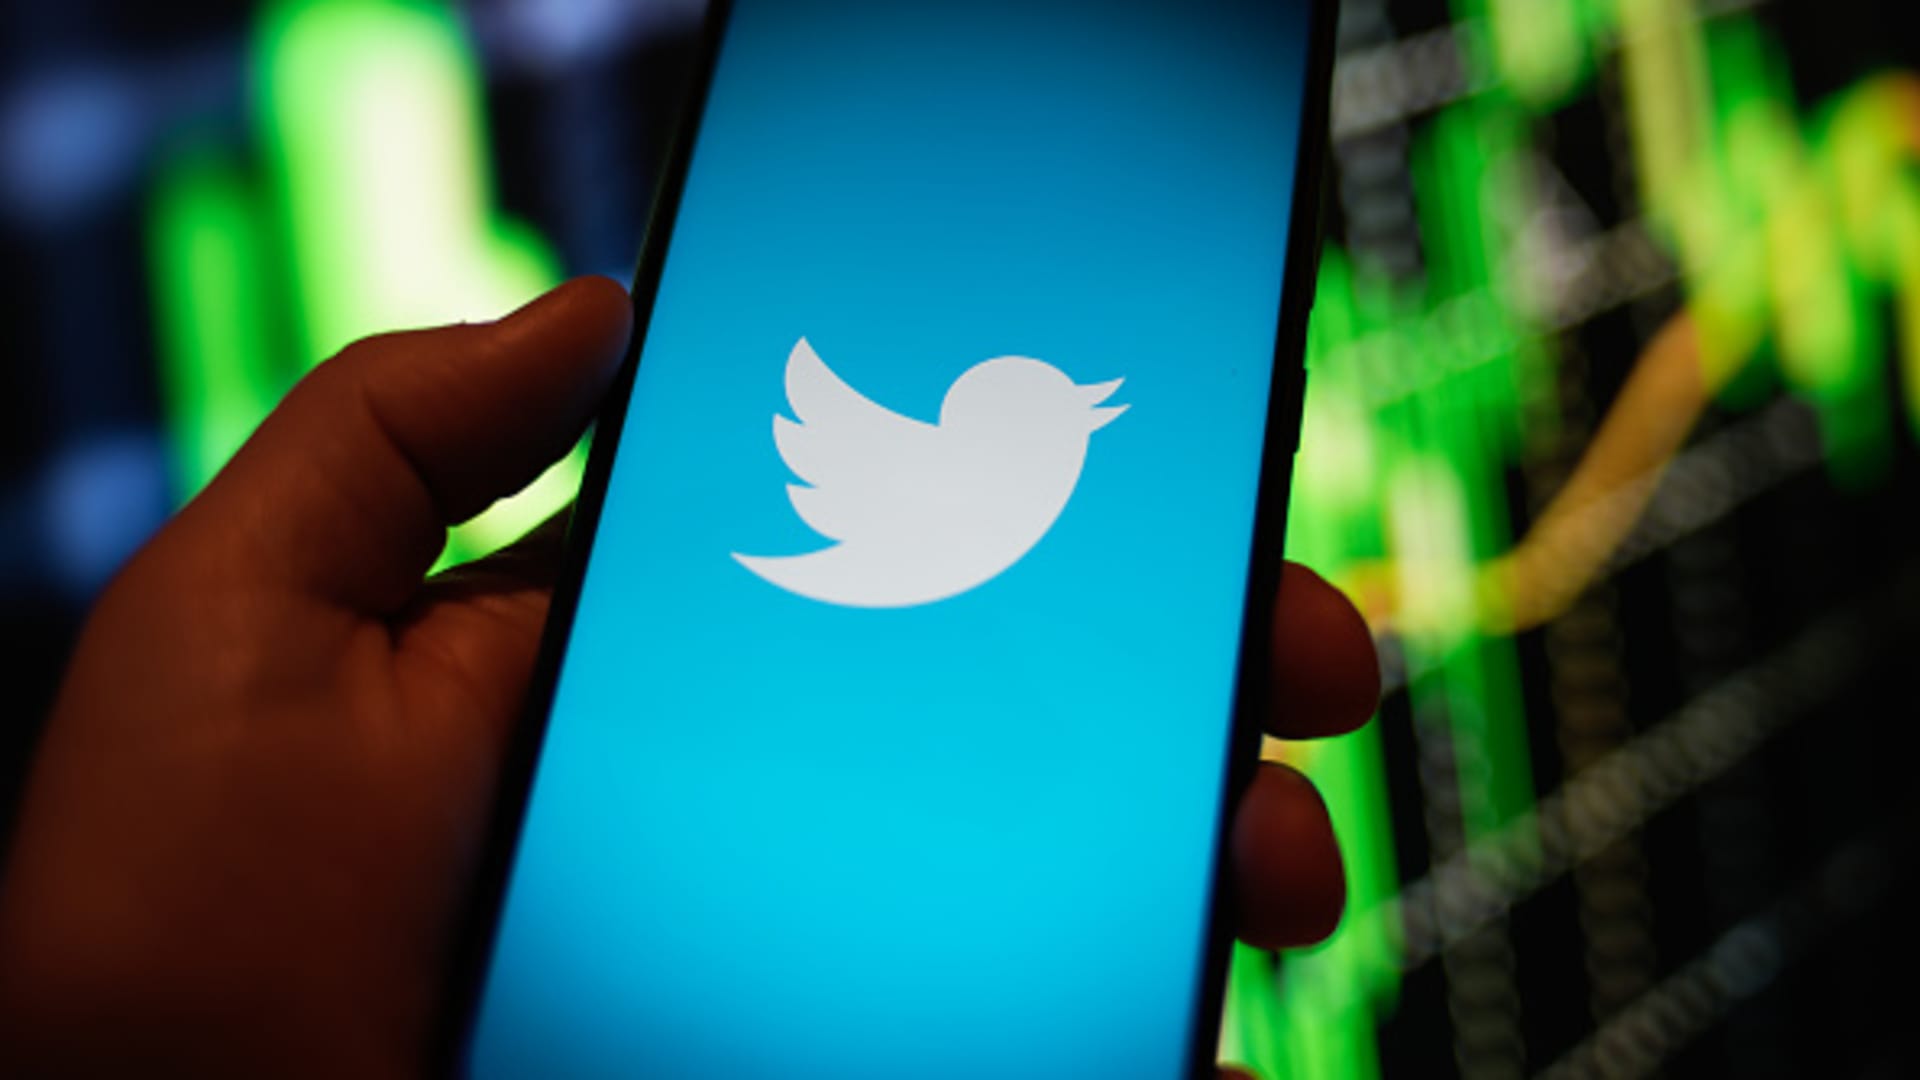 The Twitter logo is seen on a Redmi phone screen in this photo illustration in Warsaw, Poland on 23 August, 2022.